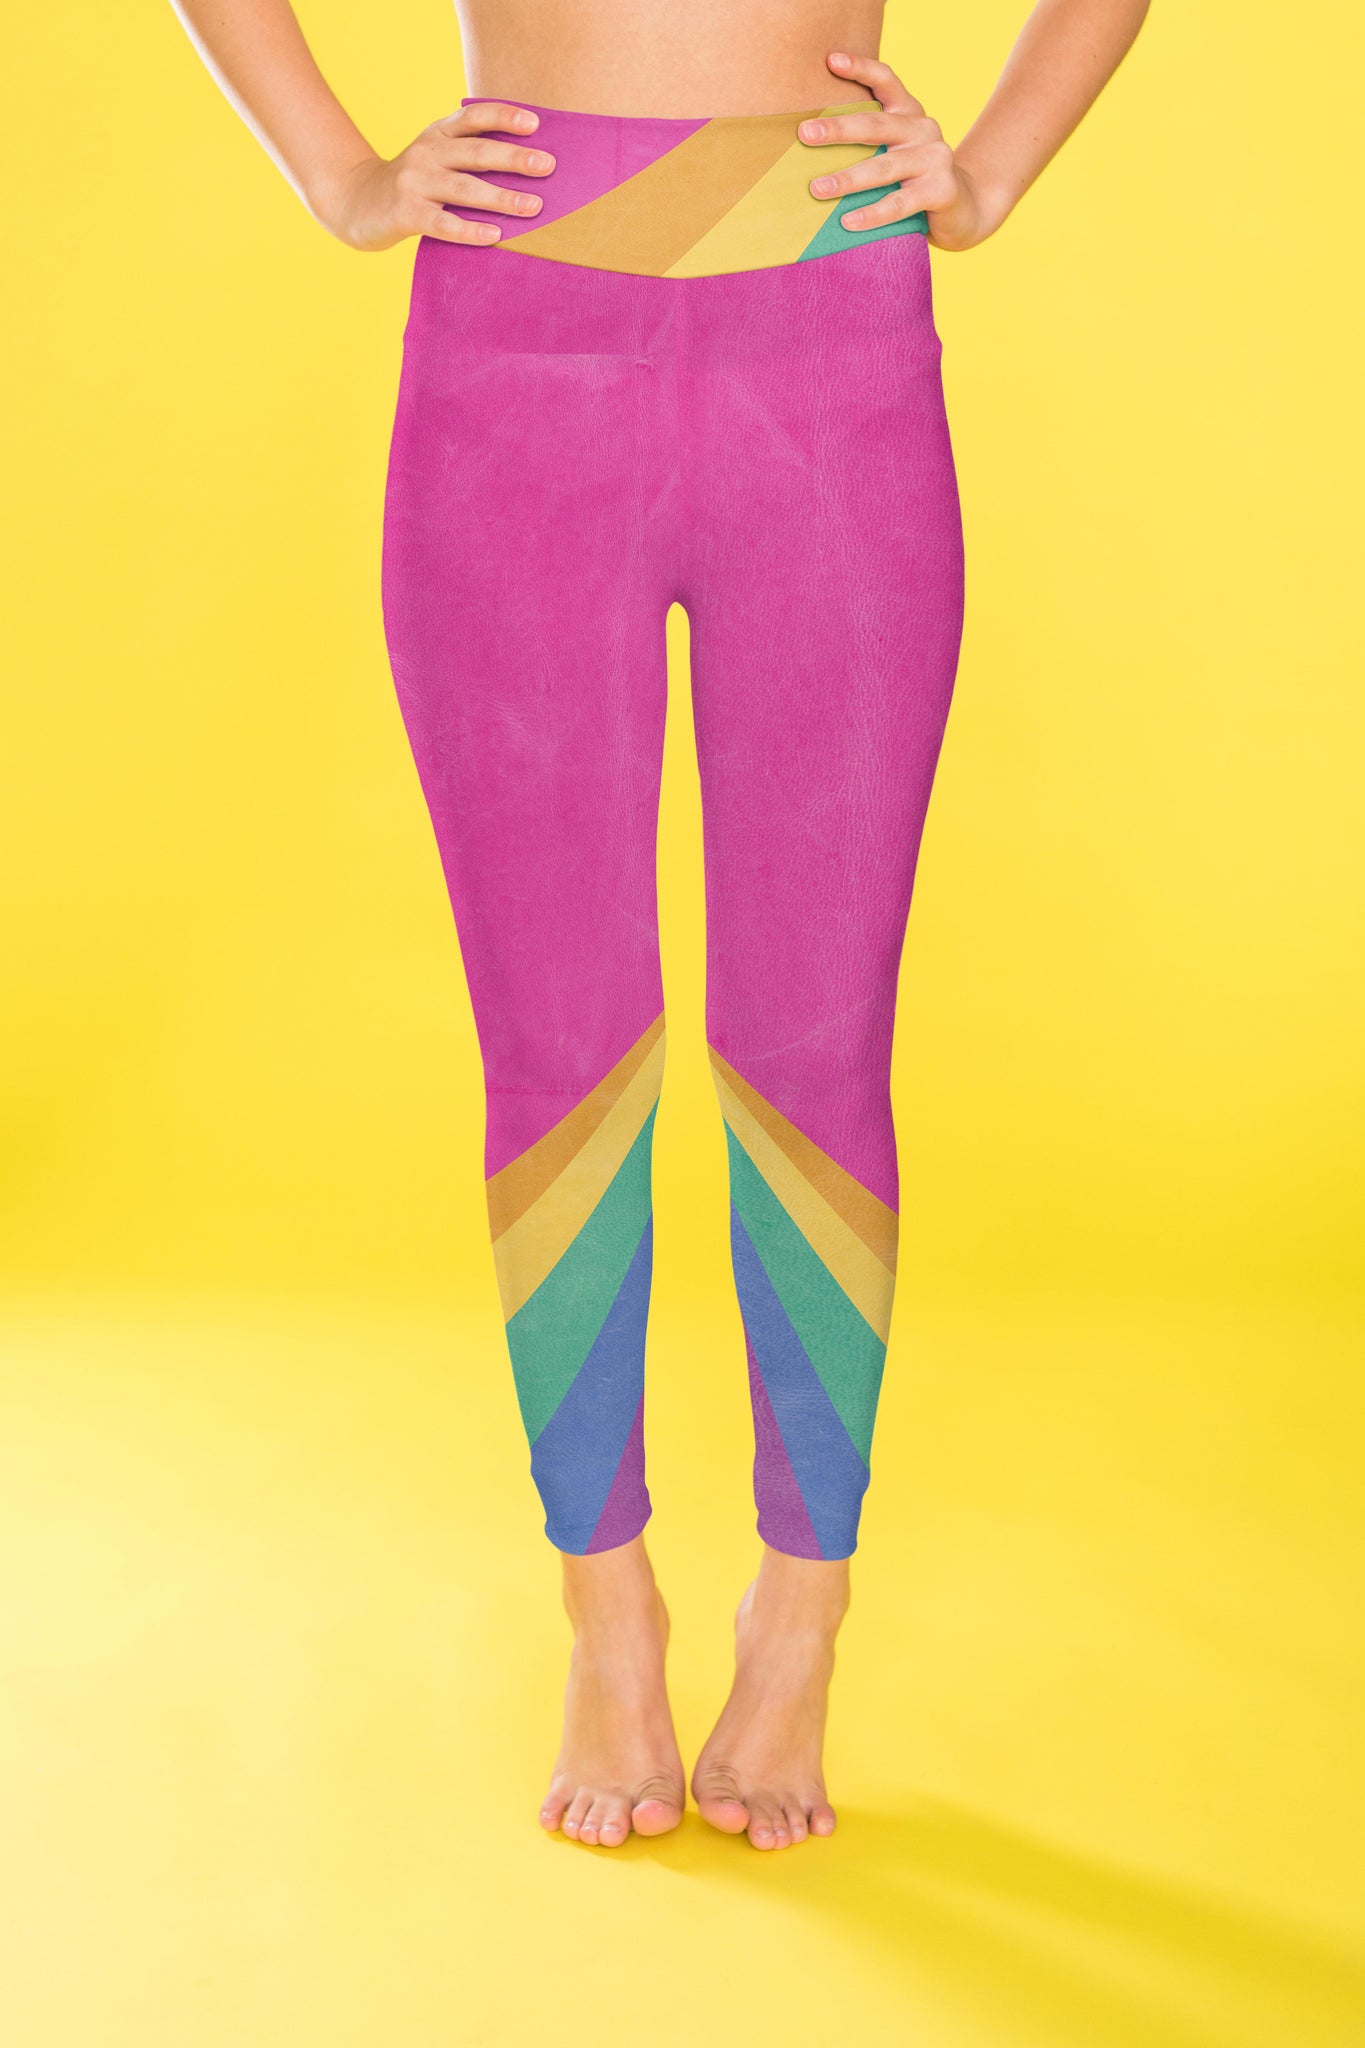 Rainbow color blocking against a bright pink backdrop on these compression leggings